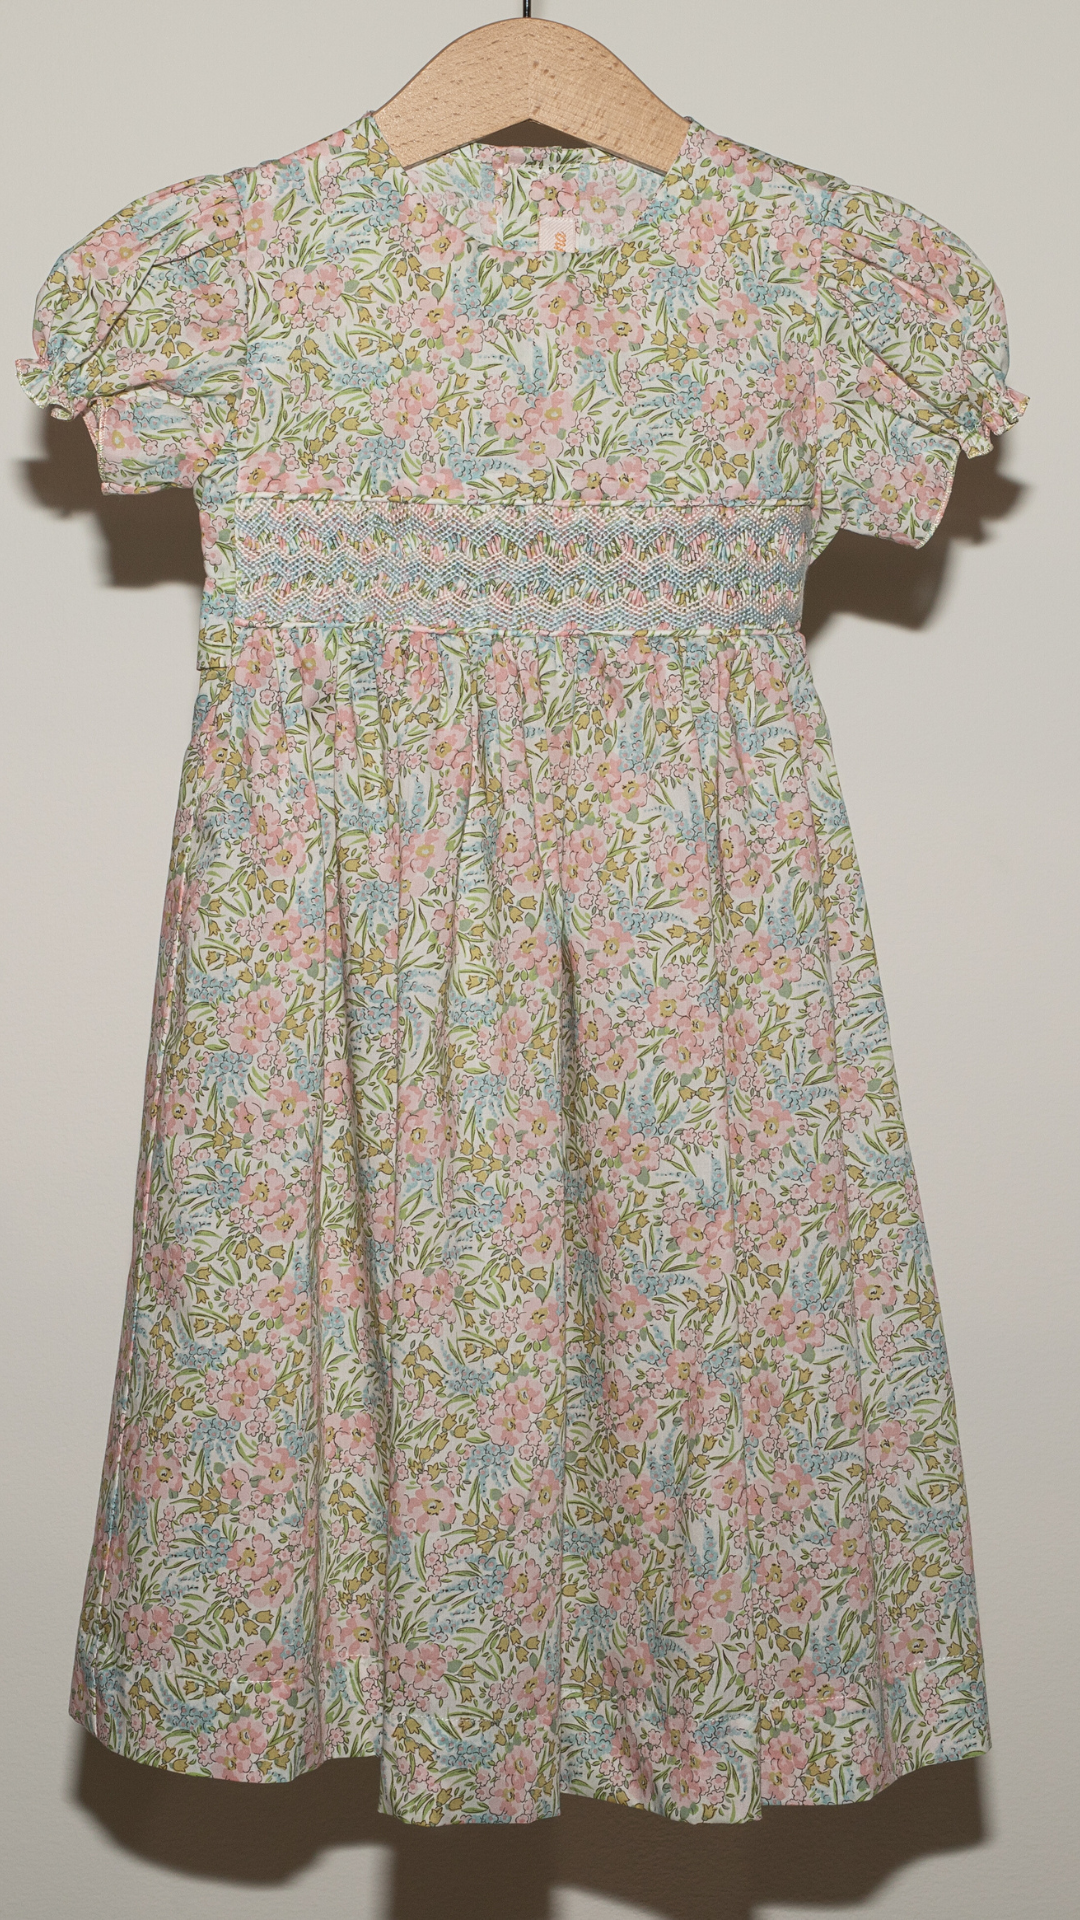 HAND EMBROIDERED DRESS IN PINK LIBERTY FLOWERS